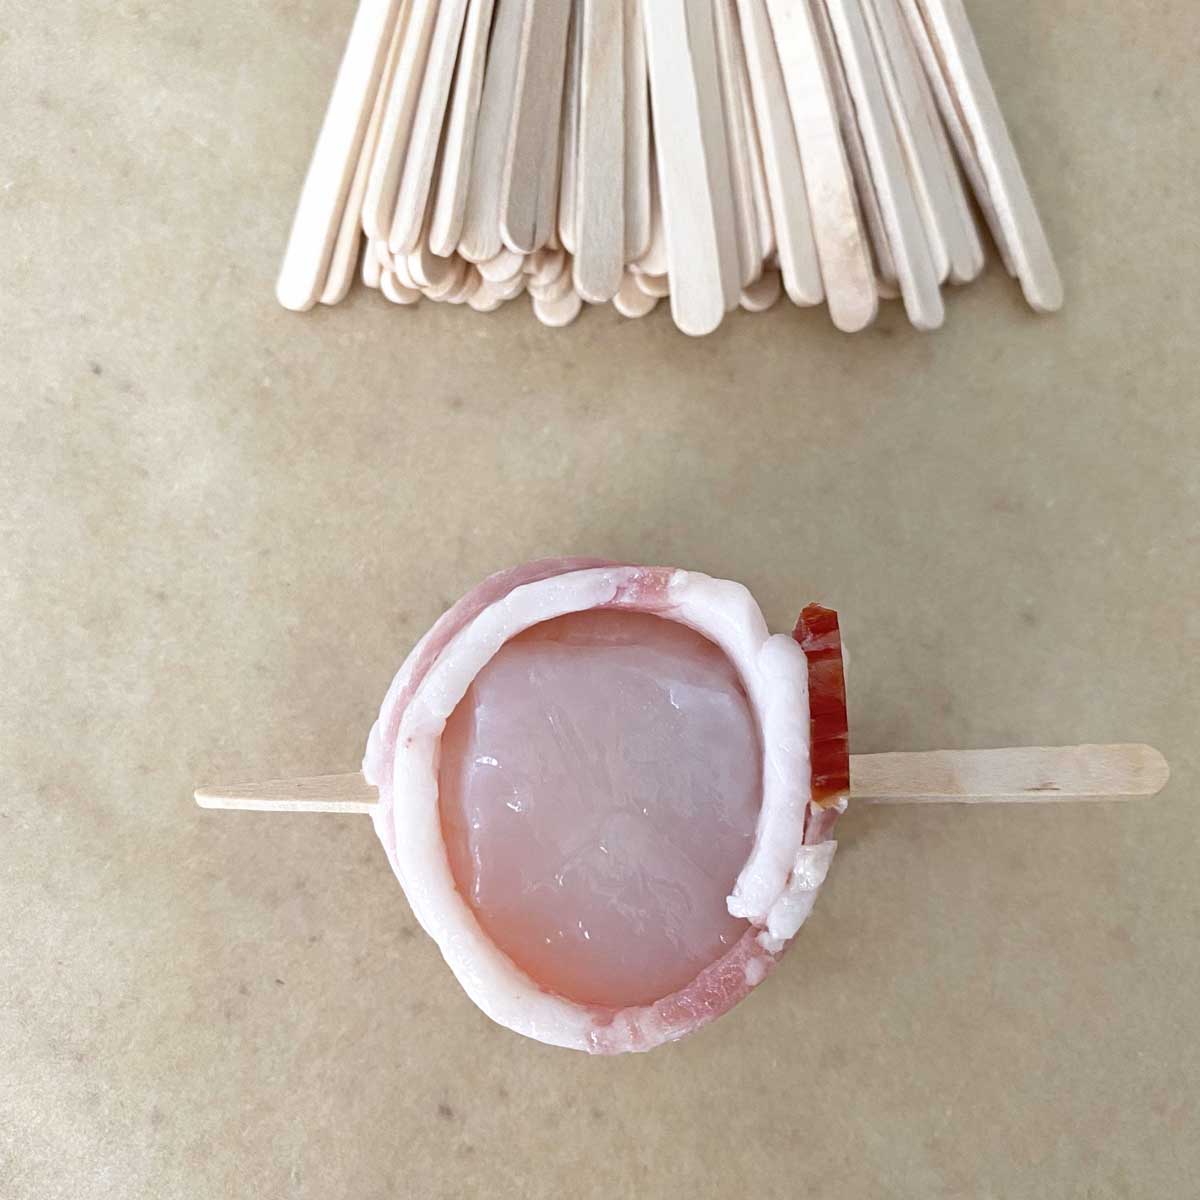 A single uncooked bacon wrapped scallop and a pile of wooden picks